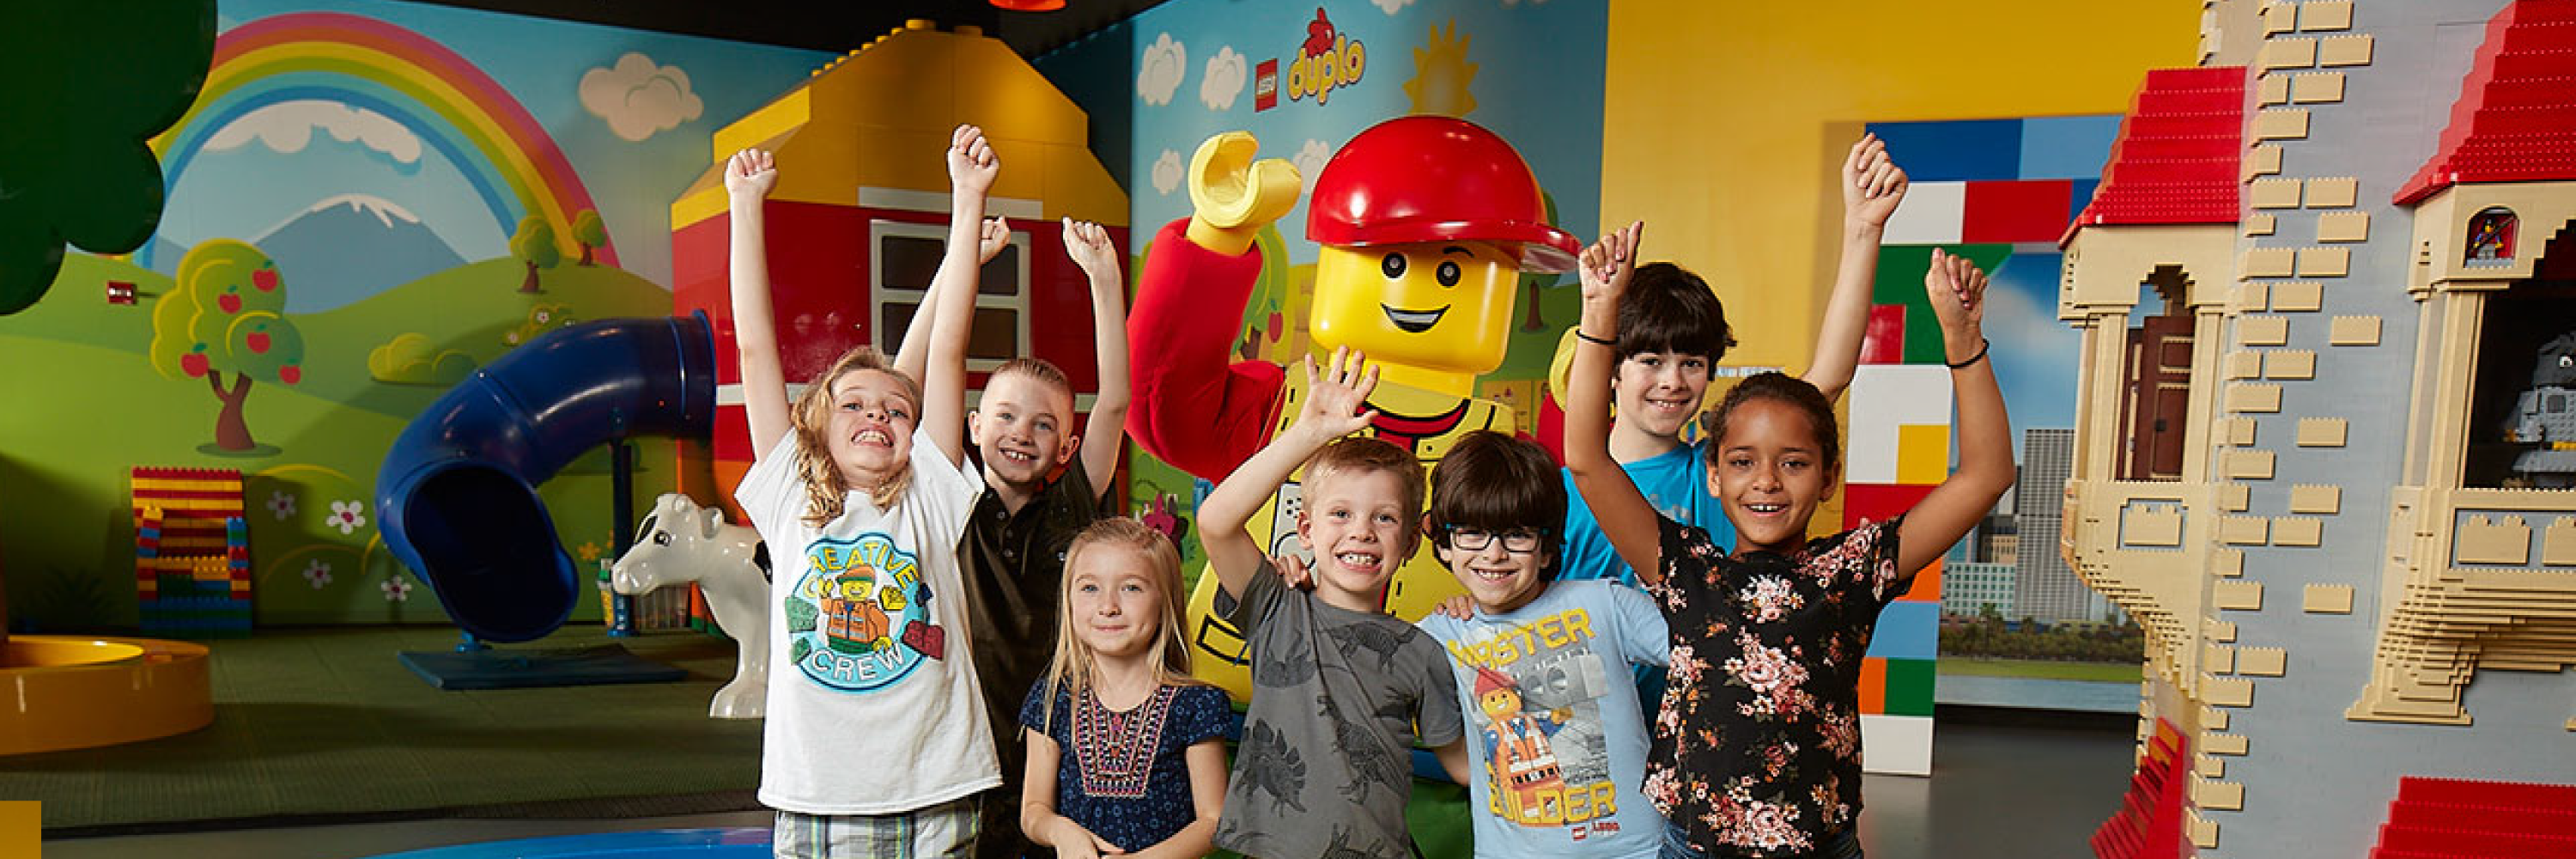 Meet LEGO Characters at LEGOLAND Discovery Center